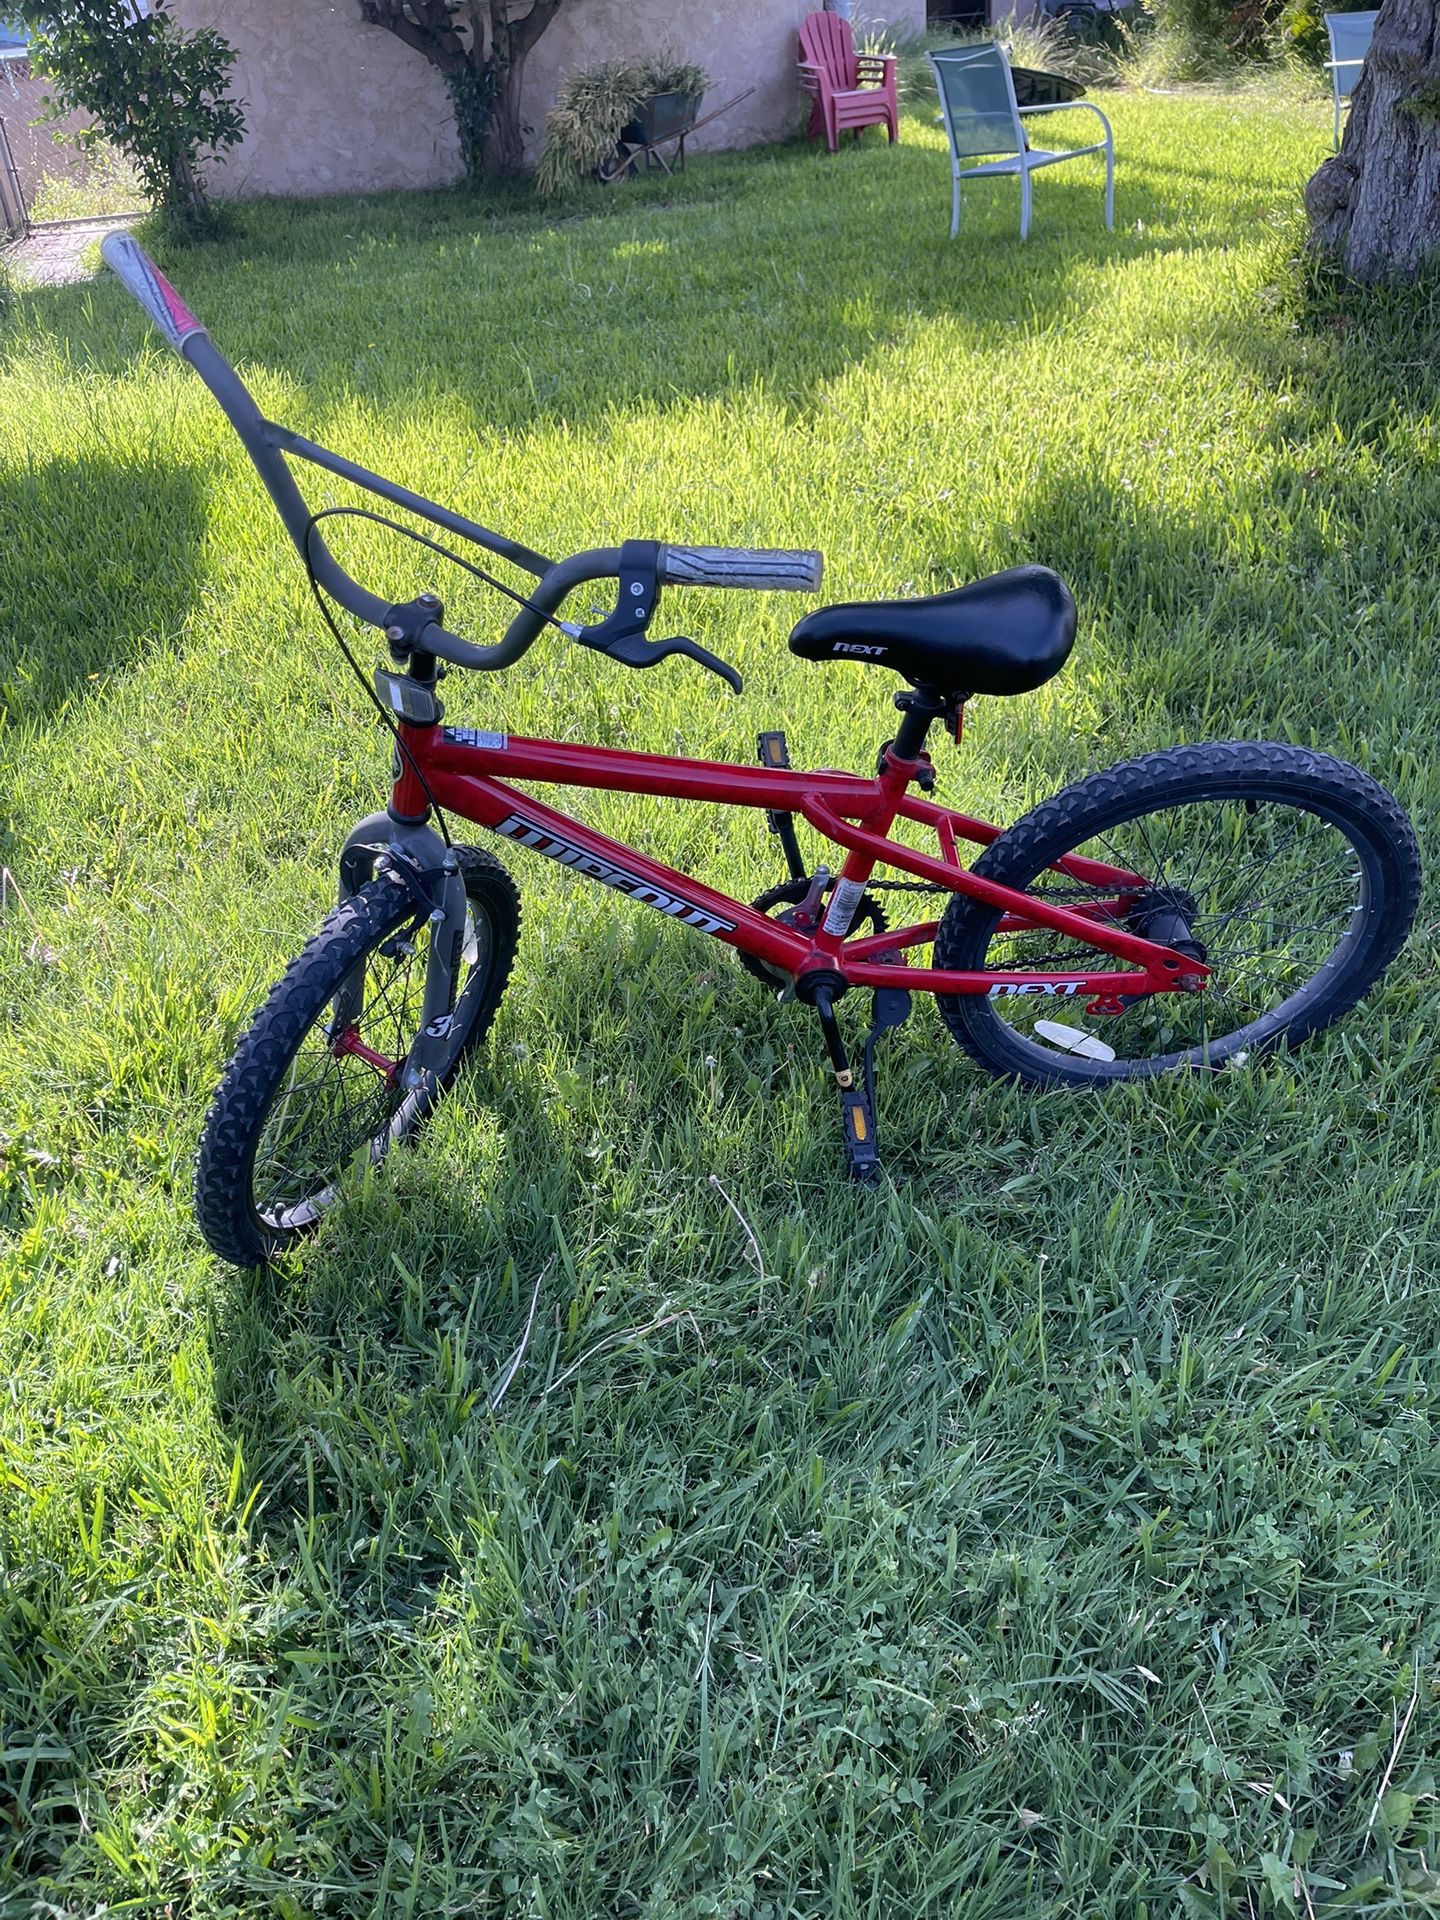 Wipeout 20” Bike For Boys, $40!